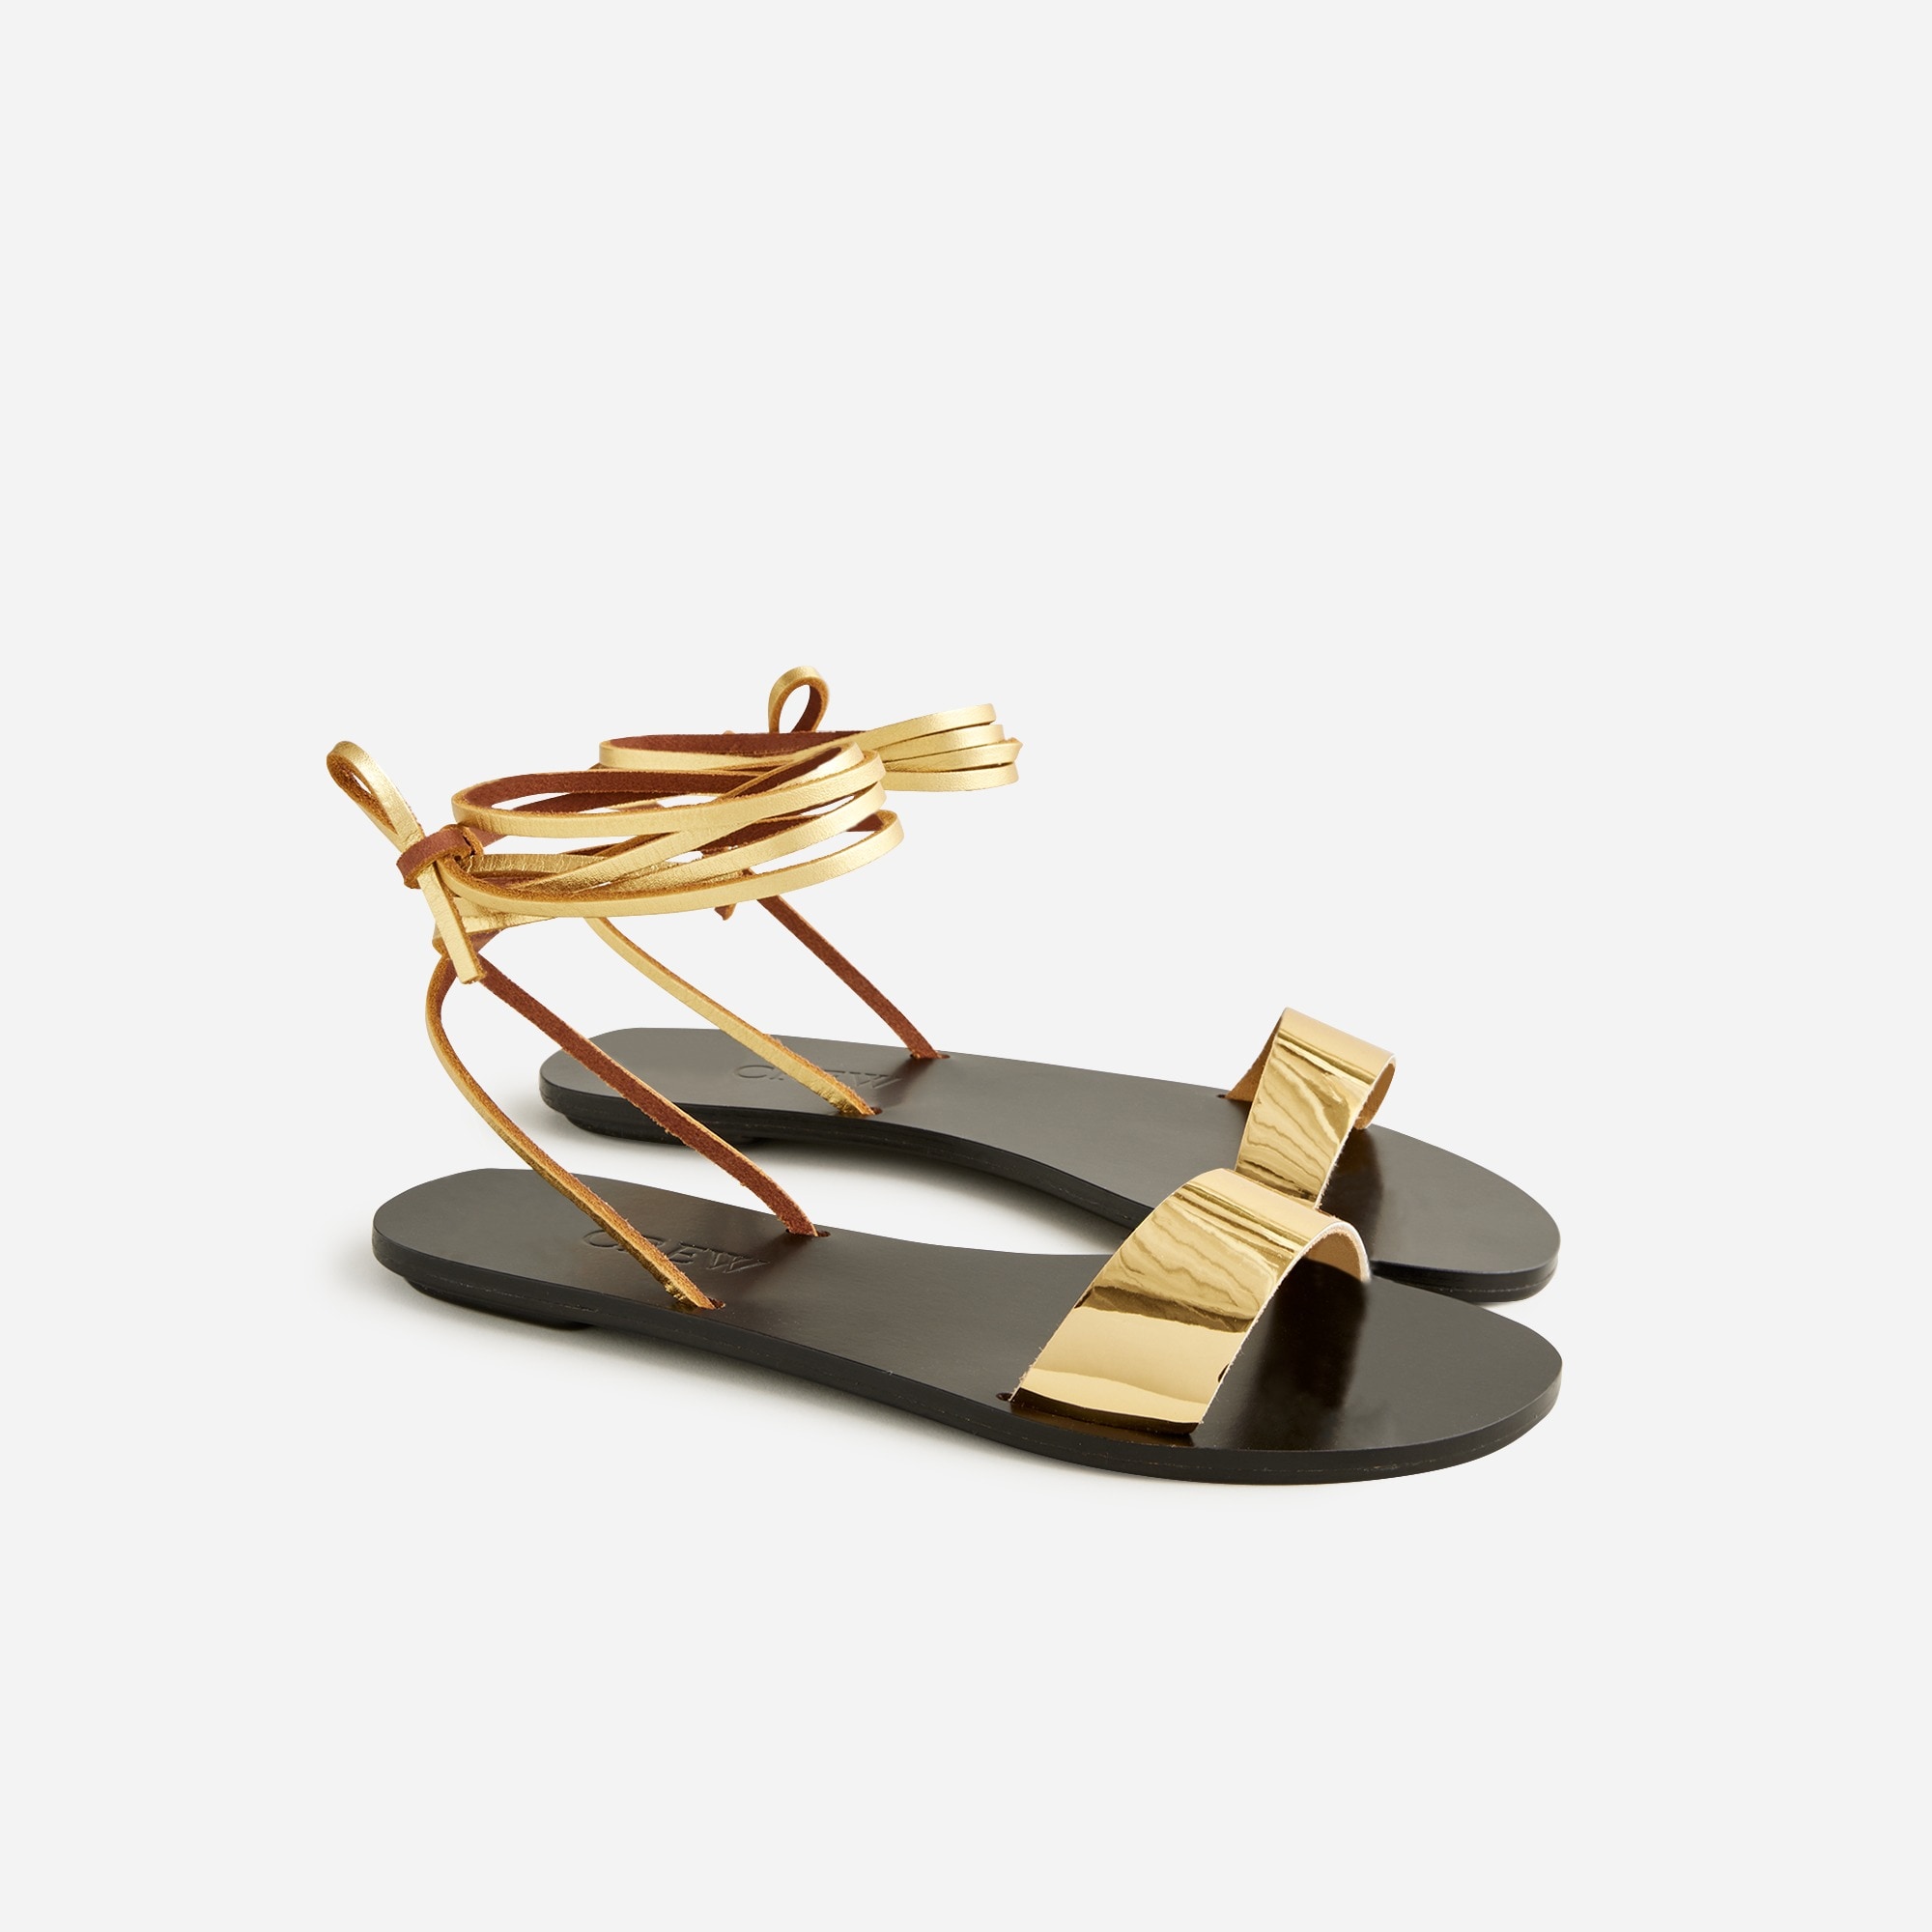  Made-in-Italy lace-up sandals in metallic leather